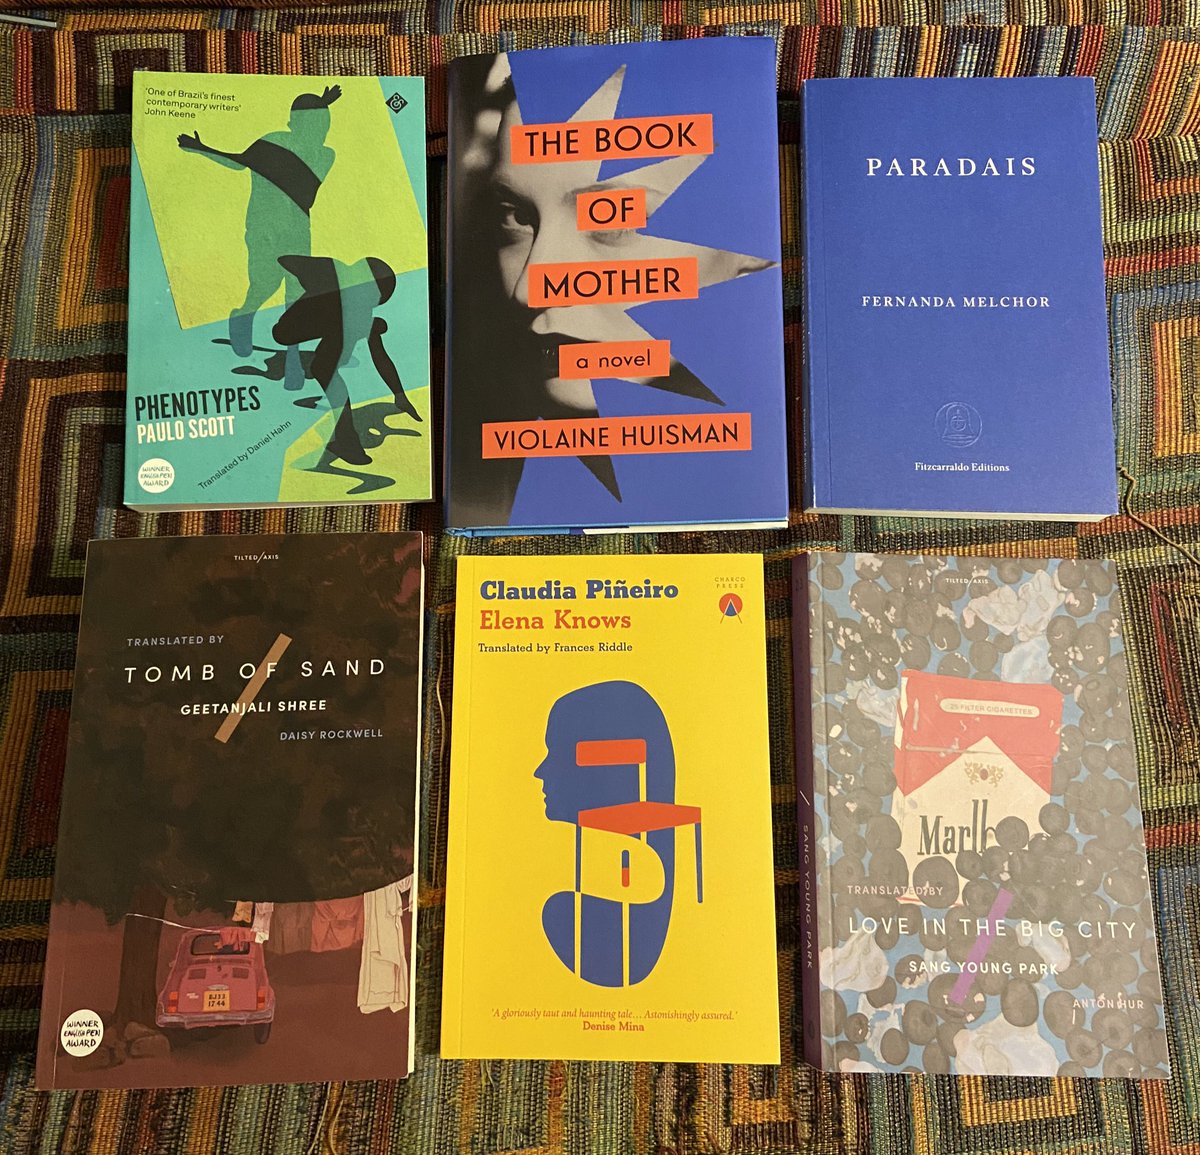 Well, here’s my #2022InternationalBooker shortlist predictions. Additional thoughts: 1) award Fosse the Nobel Prize for goodness’ sake; 2) translate all the Bora Chung — there are 3 novels out there!?!; and 3) support independent presses & works in translation. 🥰👏🙏